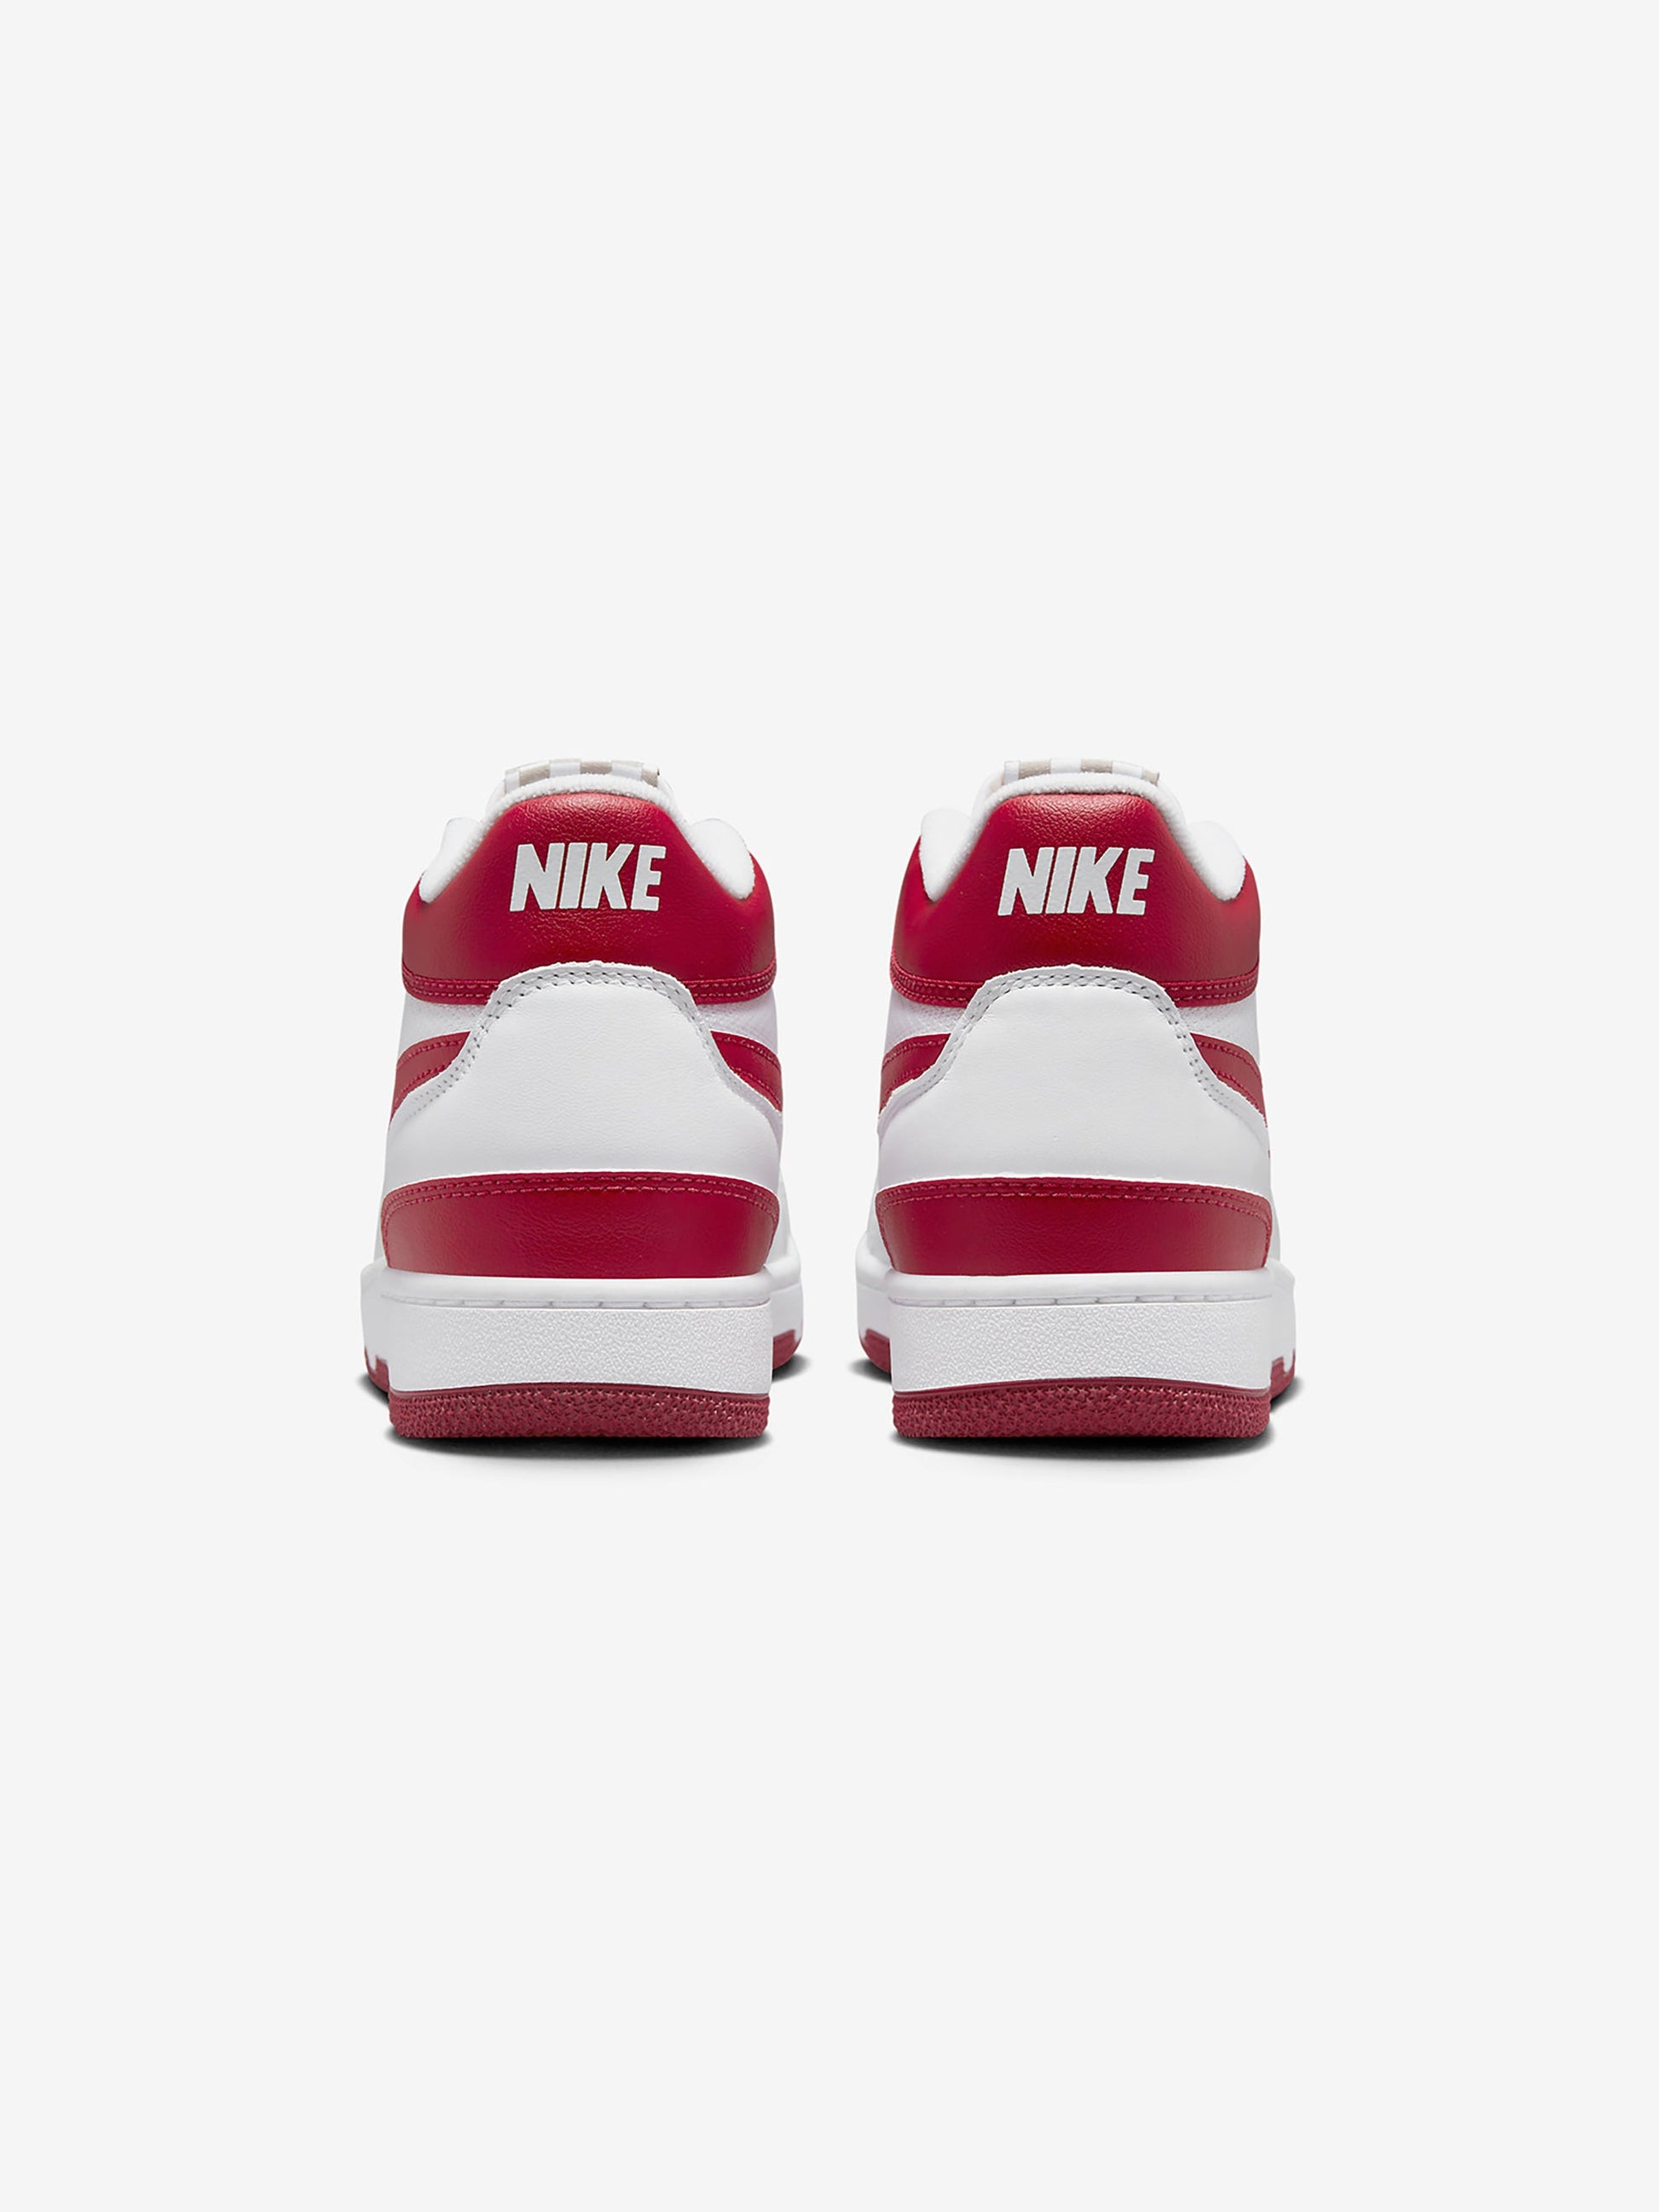 Buy Nike Nike Attack Online at UNION LOS ANGELES